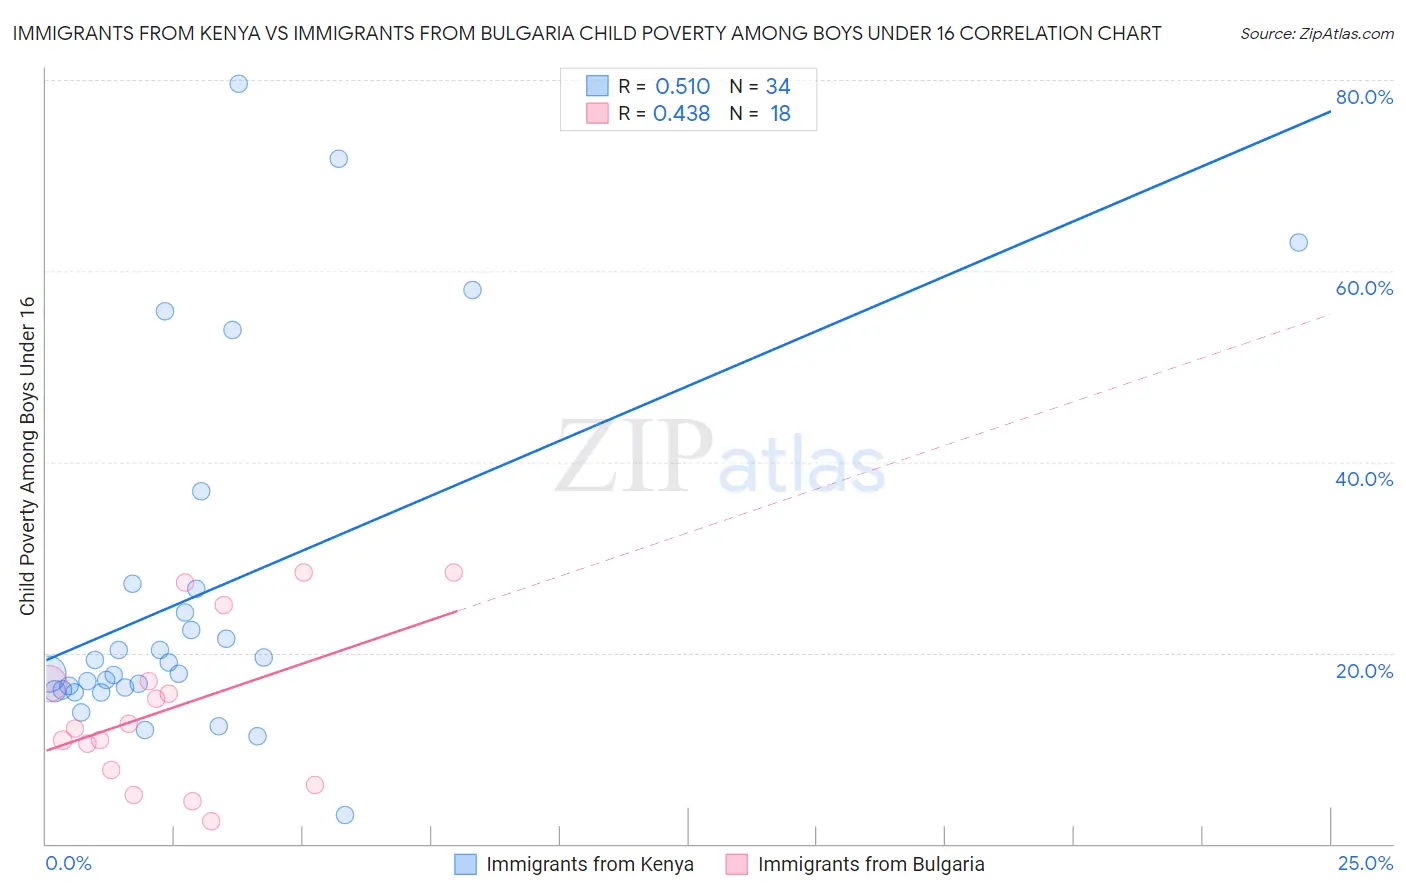 Immigrants from Kenya vs Immigrants from Bulgaria Child Poverty Among Boys Under 16